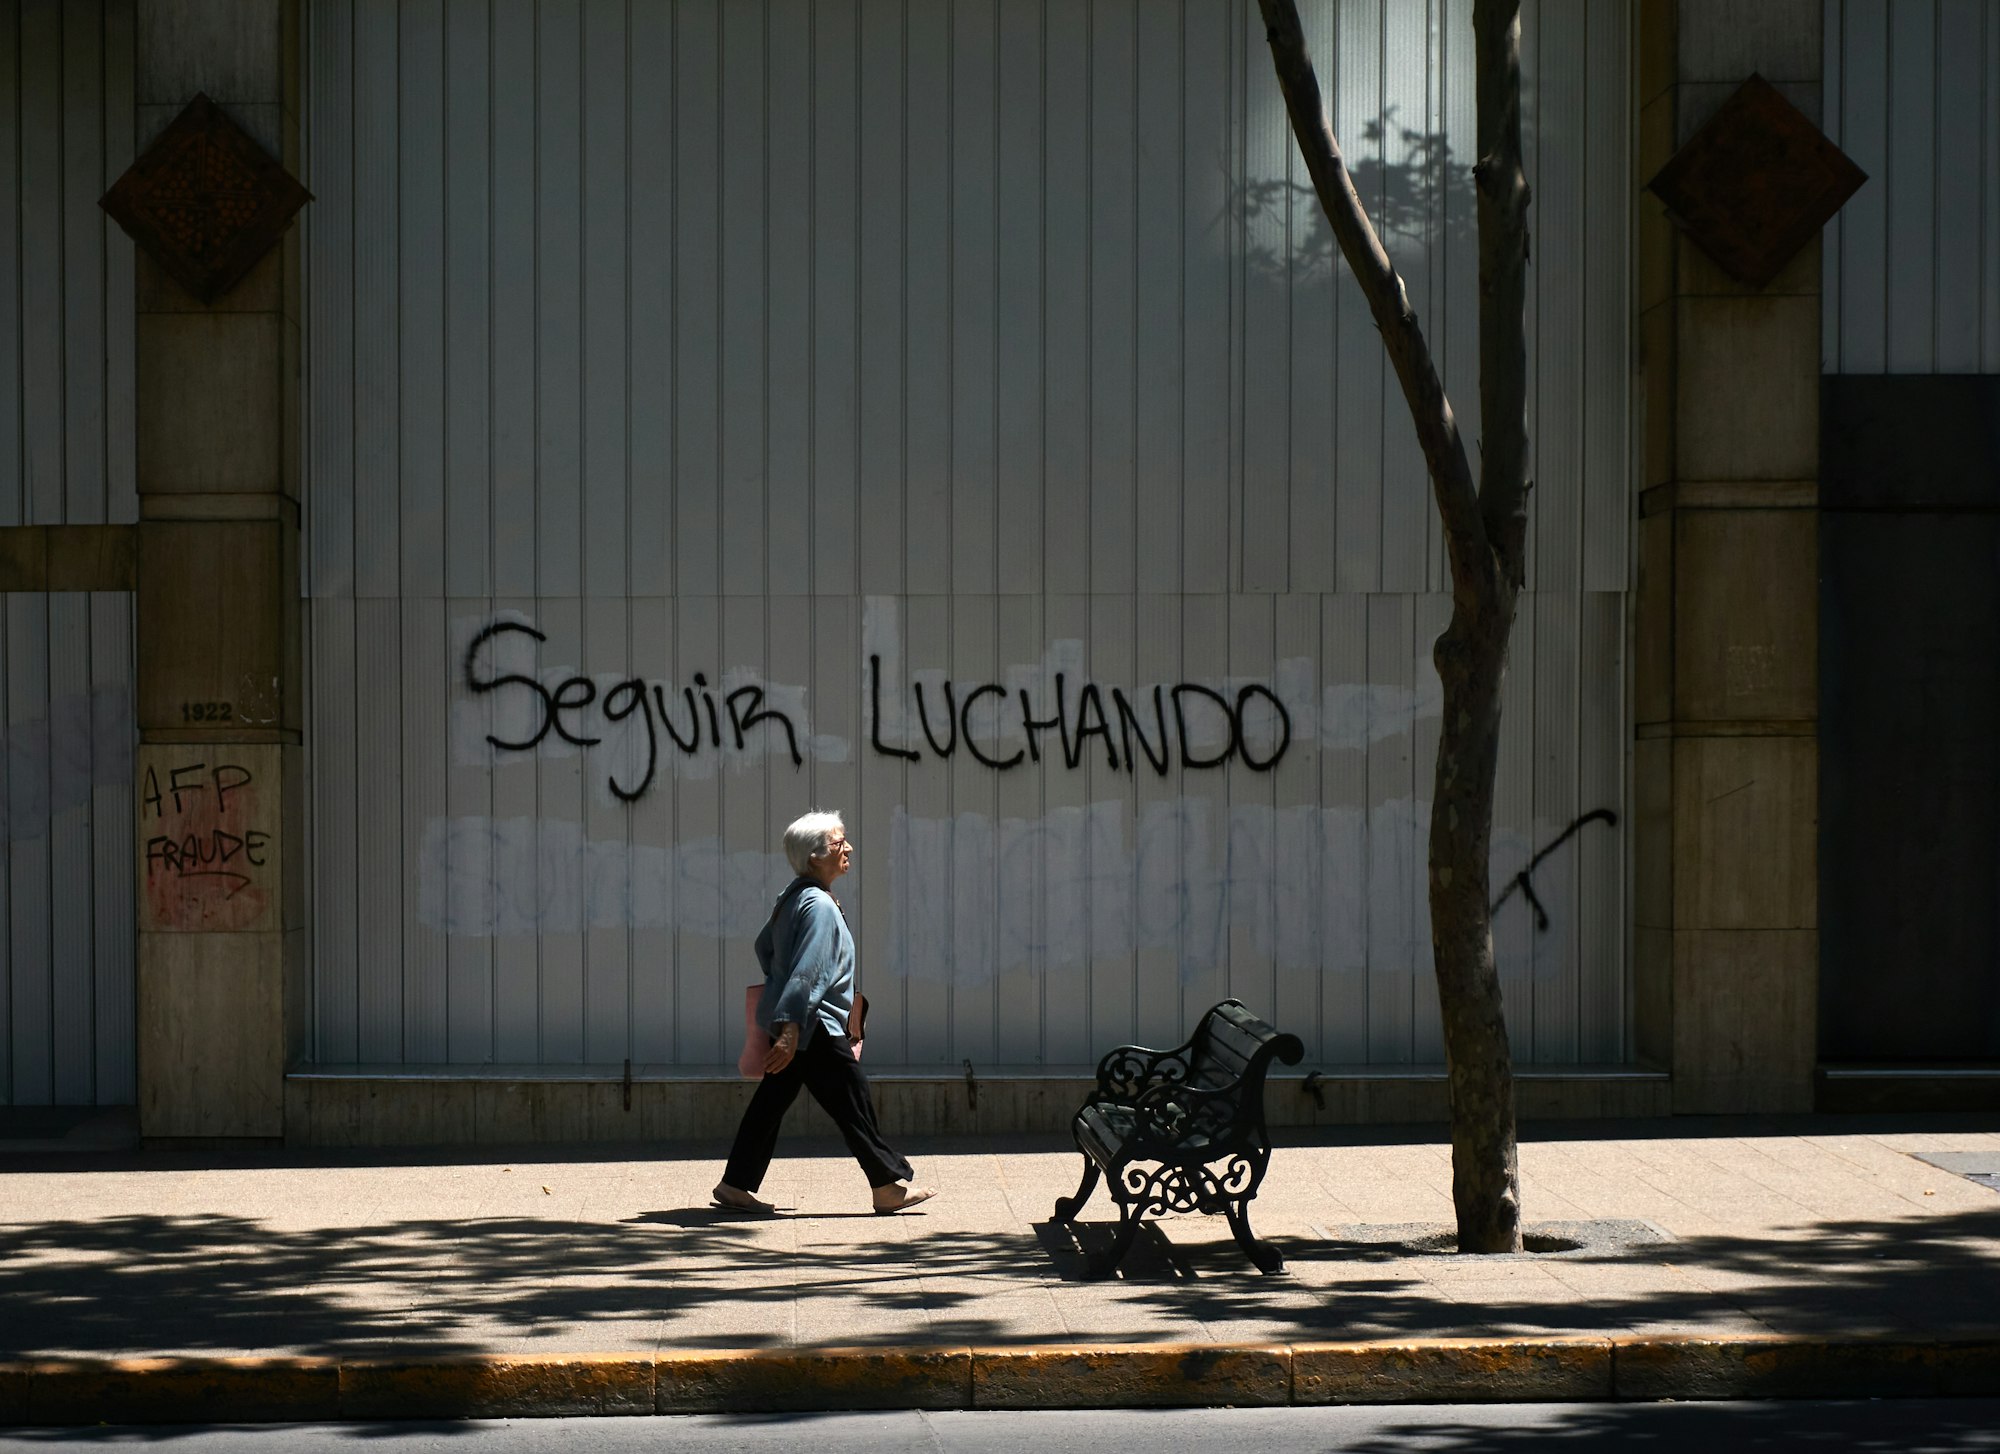 A person walks in front of grafitti written over a whitewashed wall, reading "Seguir Luchando" ("Keep Fighting")